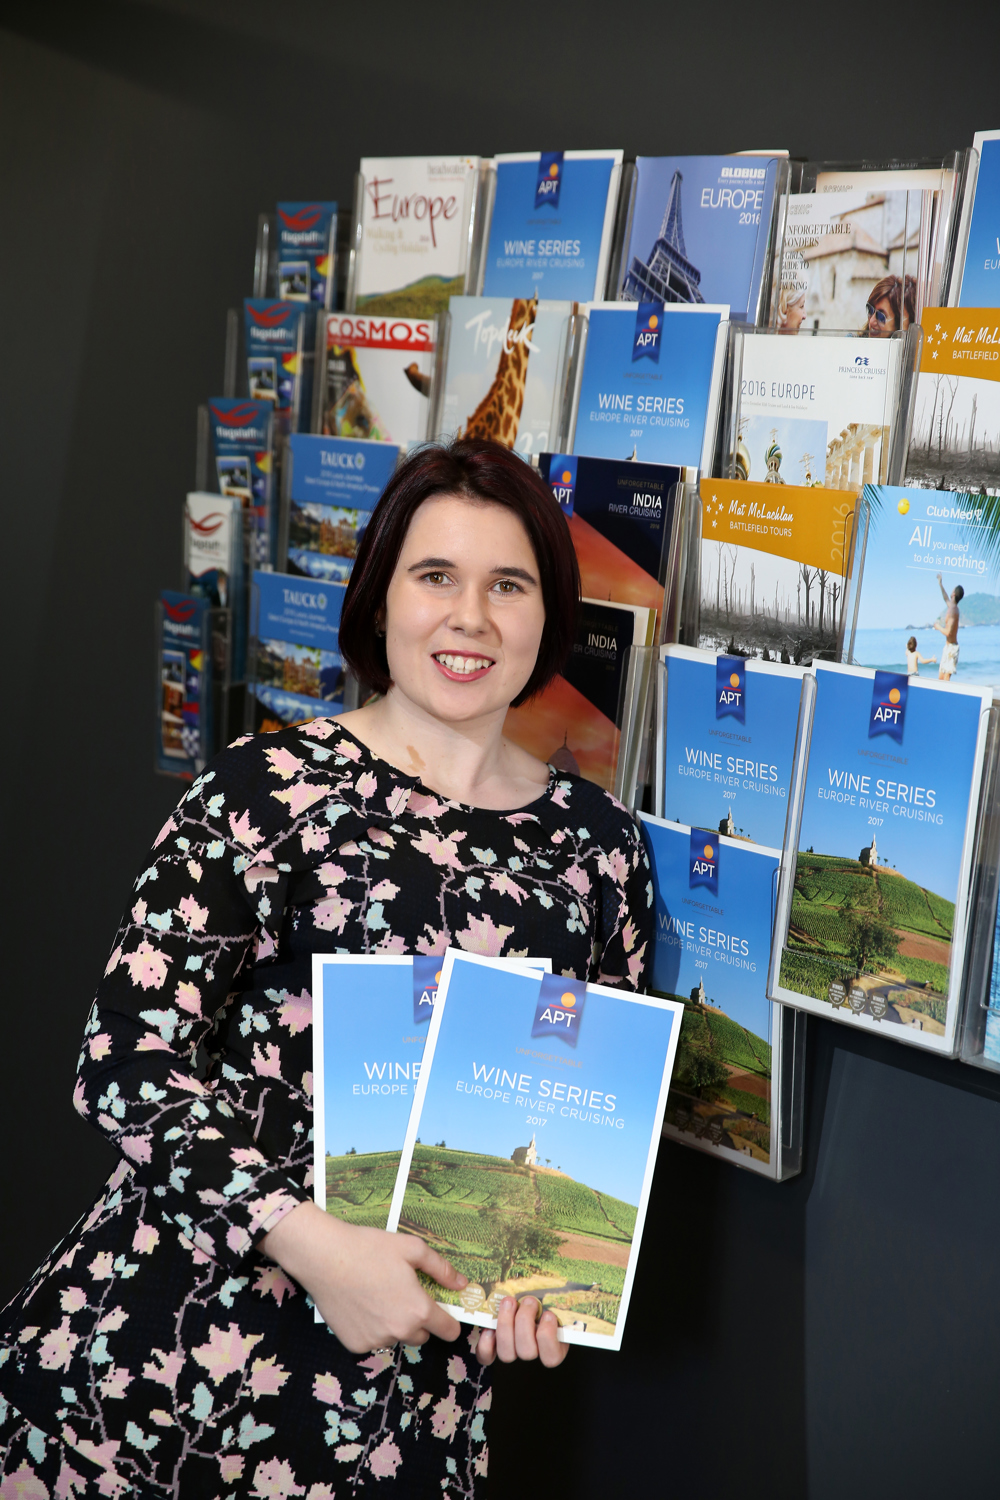 Emily McCullagh has completed Diploma of Travel, Tourism and Events at South West TAFE